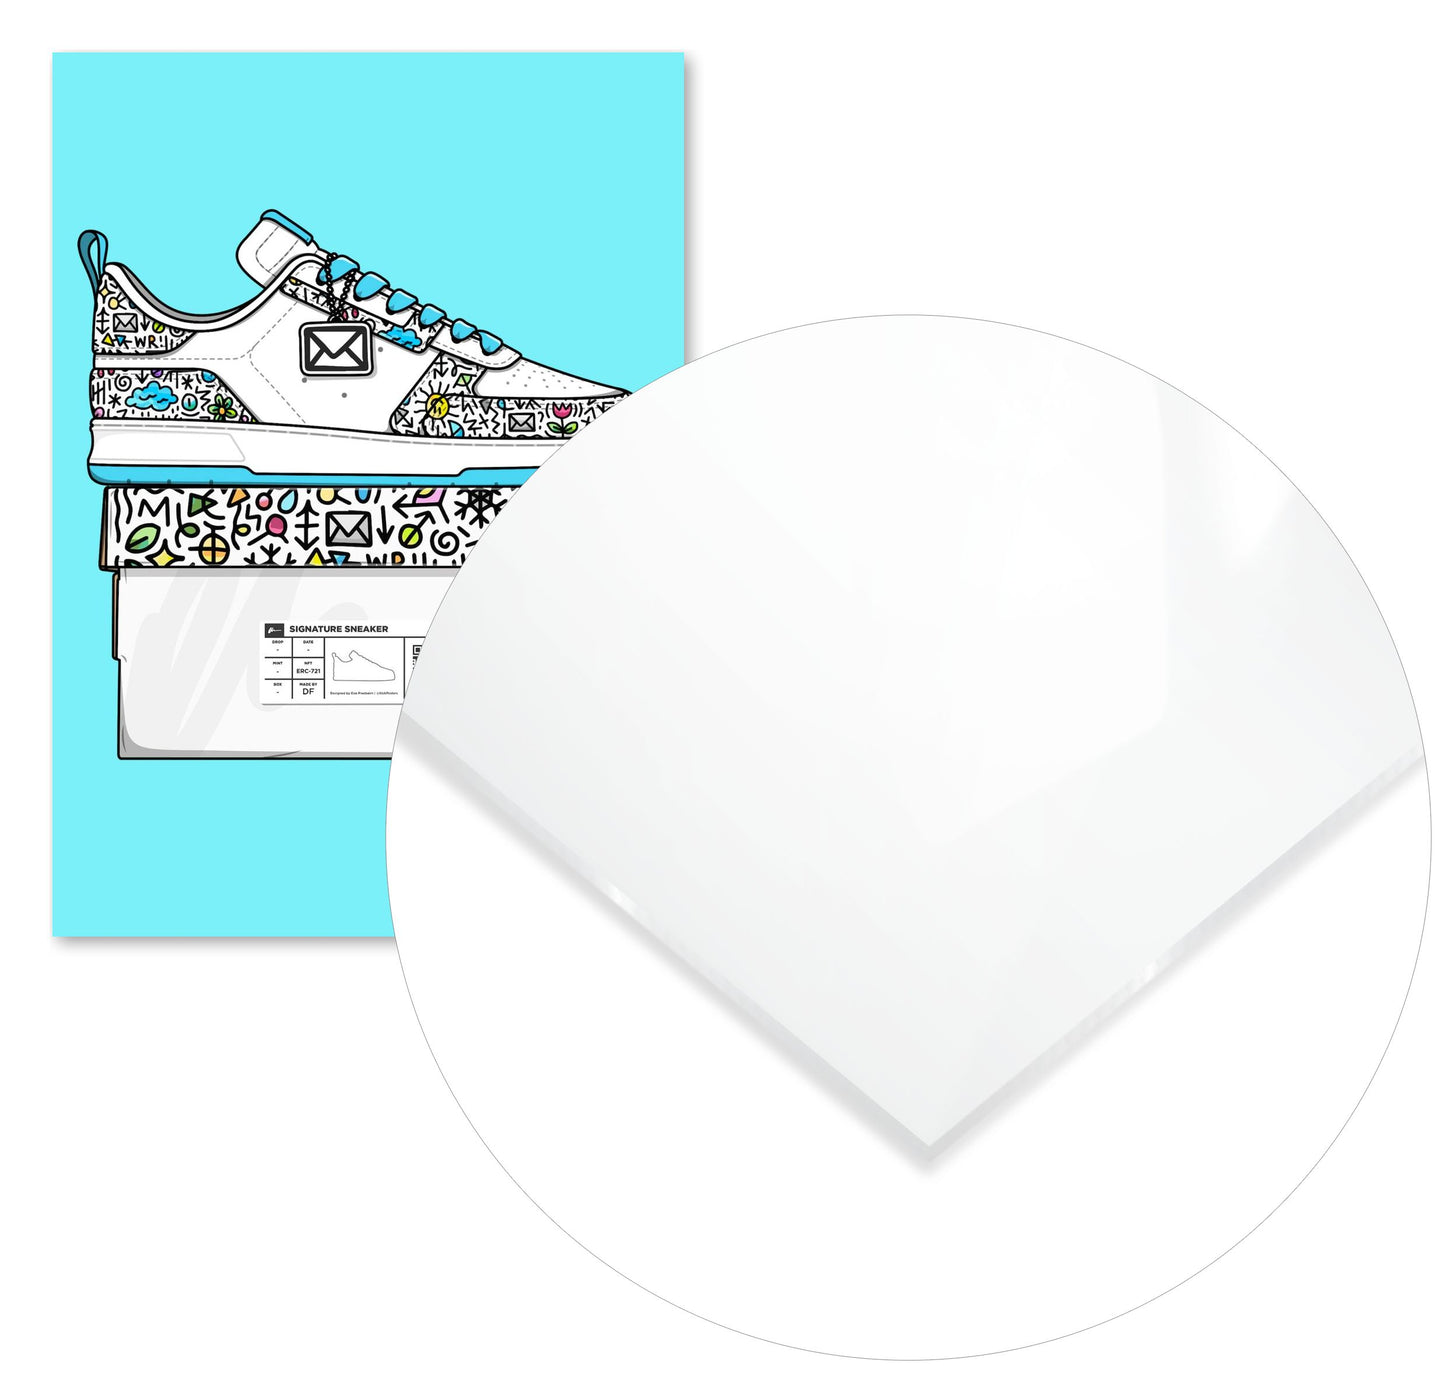 Signature Sneaker 'Weather Letters' - @MyKido